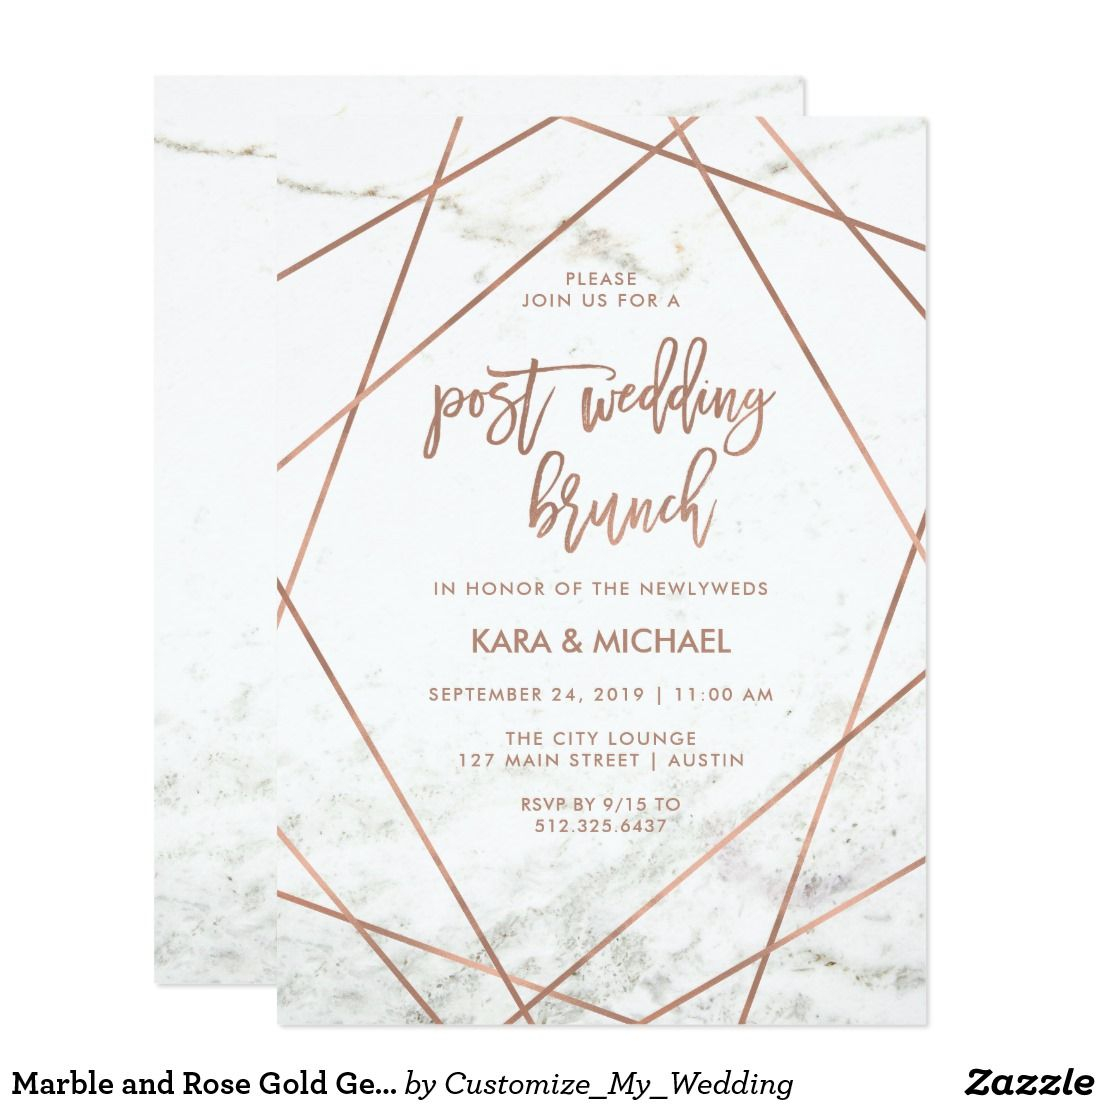 Post Wedding Brunch Invitations Marble And Rose Gold Geometric Post Wedding Brunch Invitation